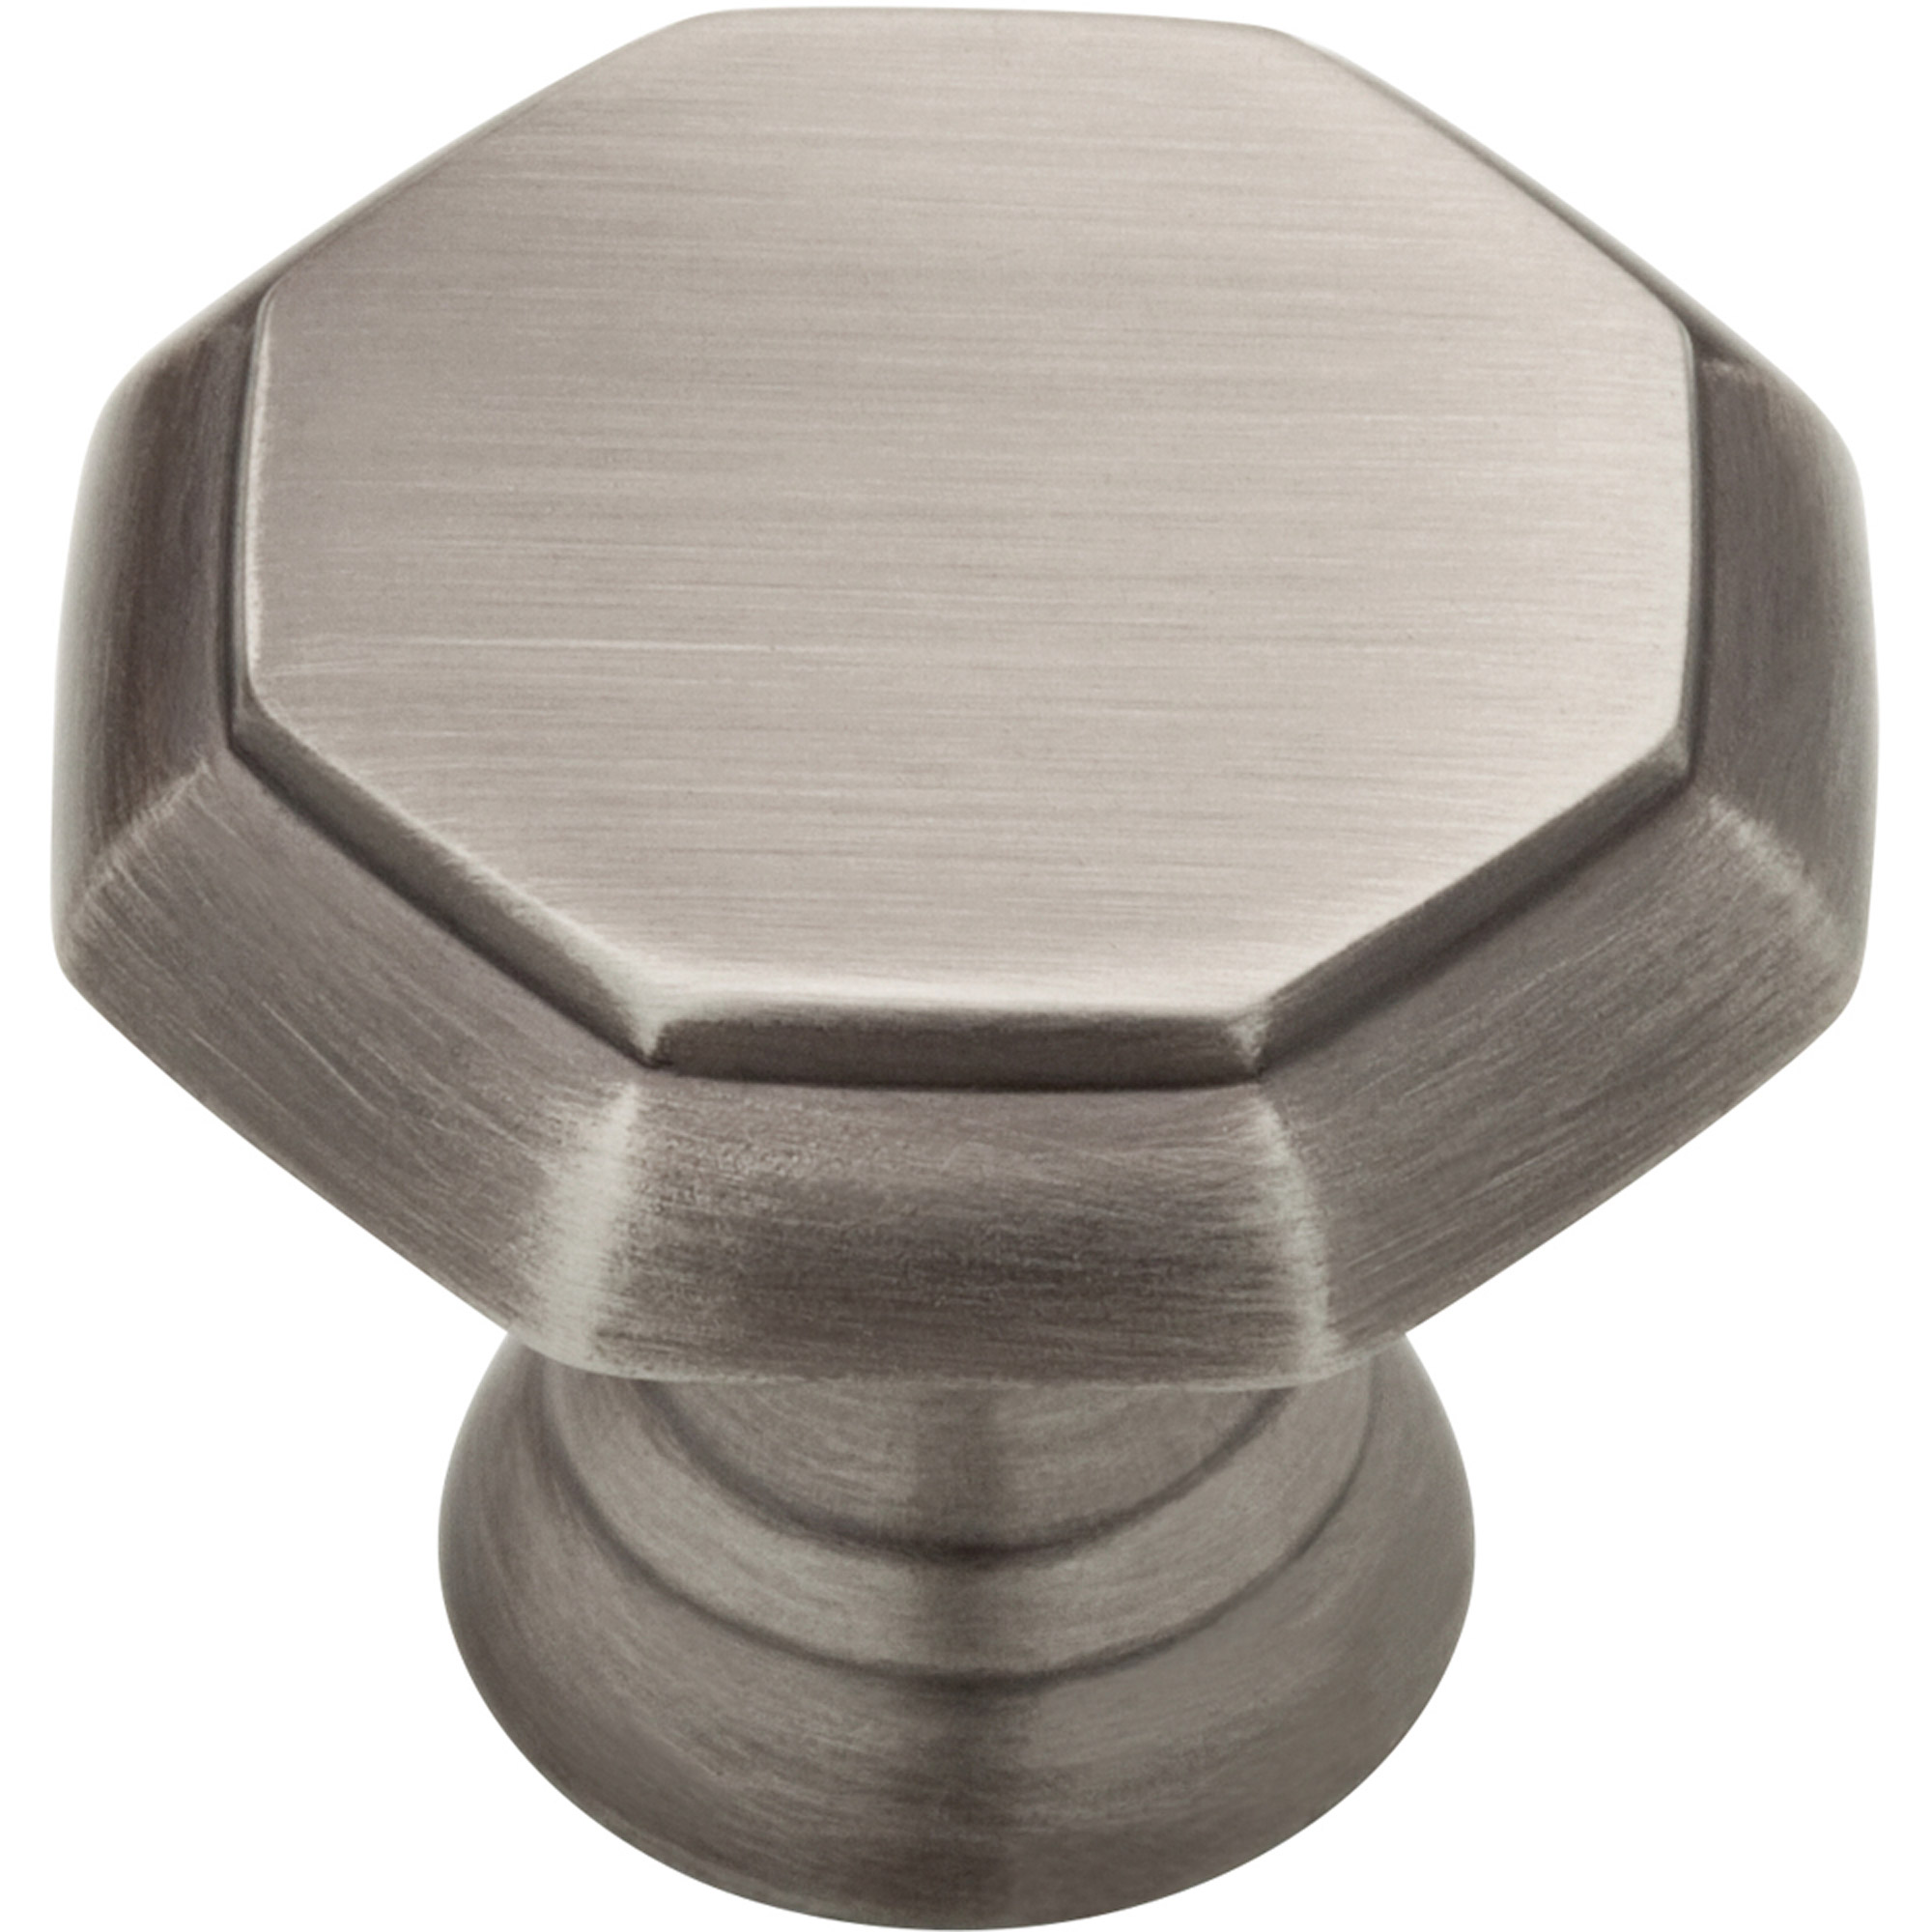 Liberty 30mm Octagon Knob, Available in Multiple Colors - image 1 of 4